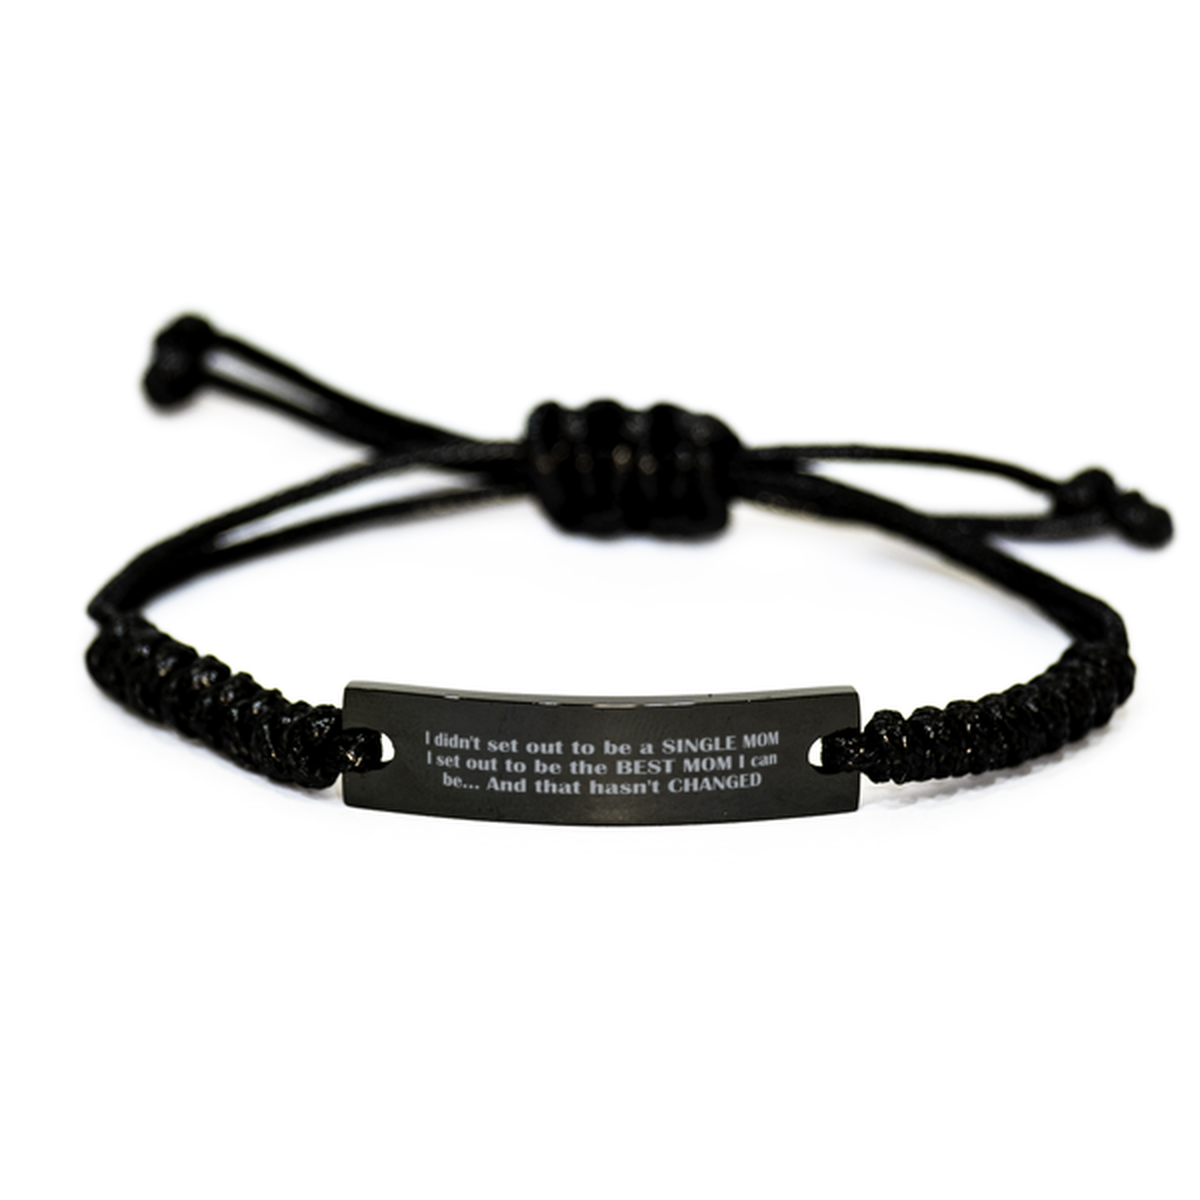 To My Single Mom Rope Bracelet, To Be The Best Mom, Mothers Day Gifts For Single Mom From Friends, Birthday Gifts For Women